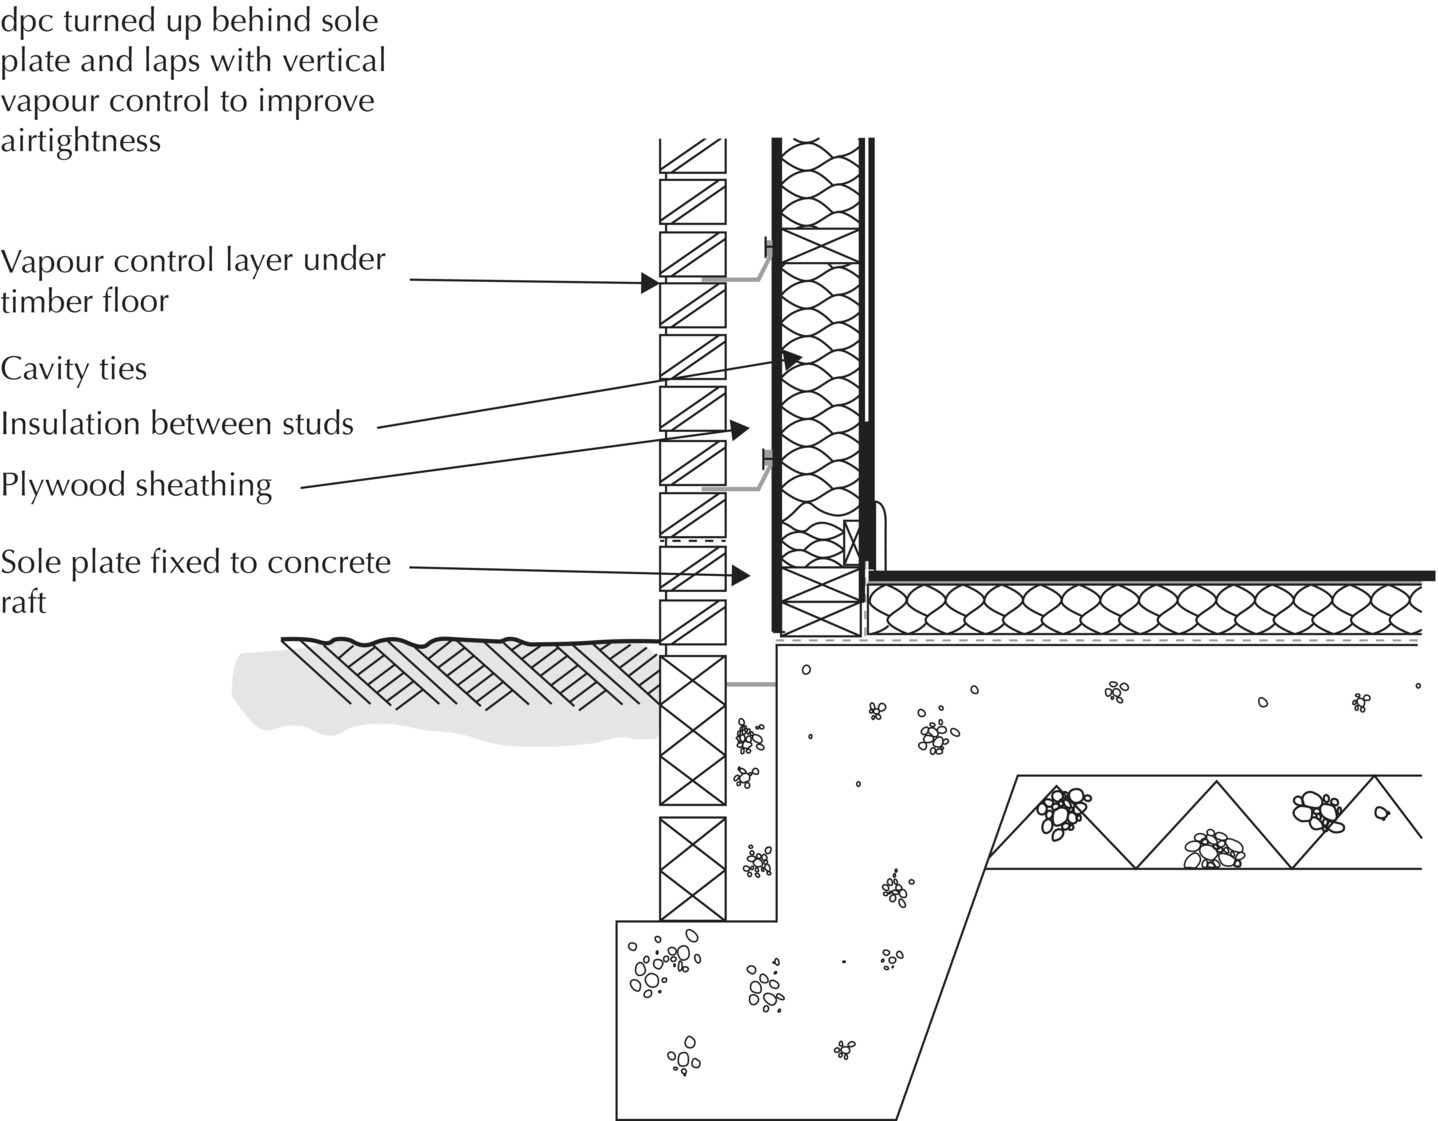 Timber‐framed wall on raft foundation with arrows marking the vapour control layer under timber floor, cavity ties, insulation between studs, plywood sheathing, and sole plate fixed to concrete raft.